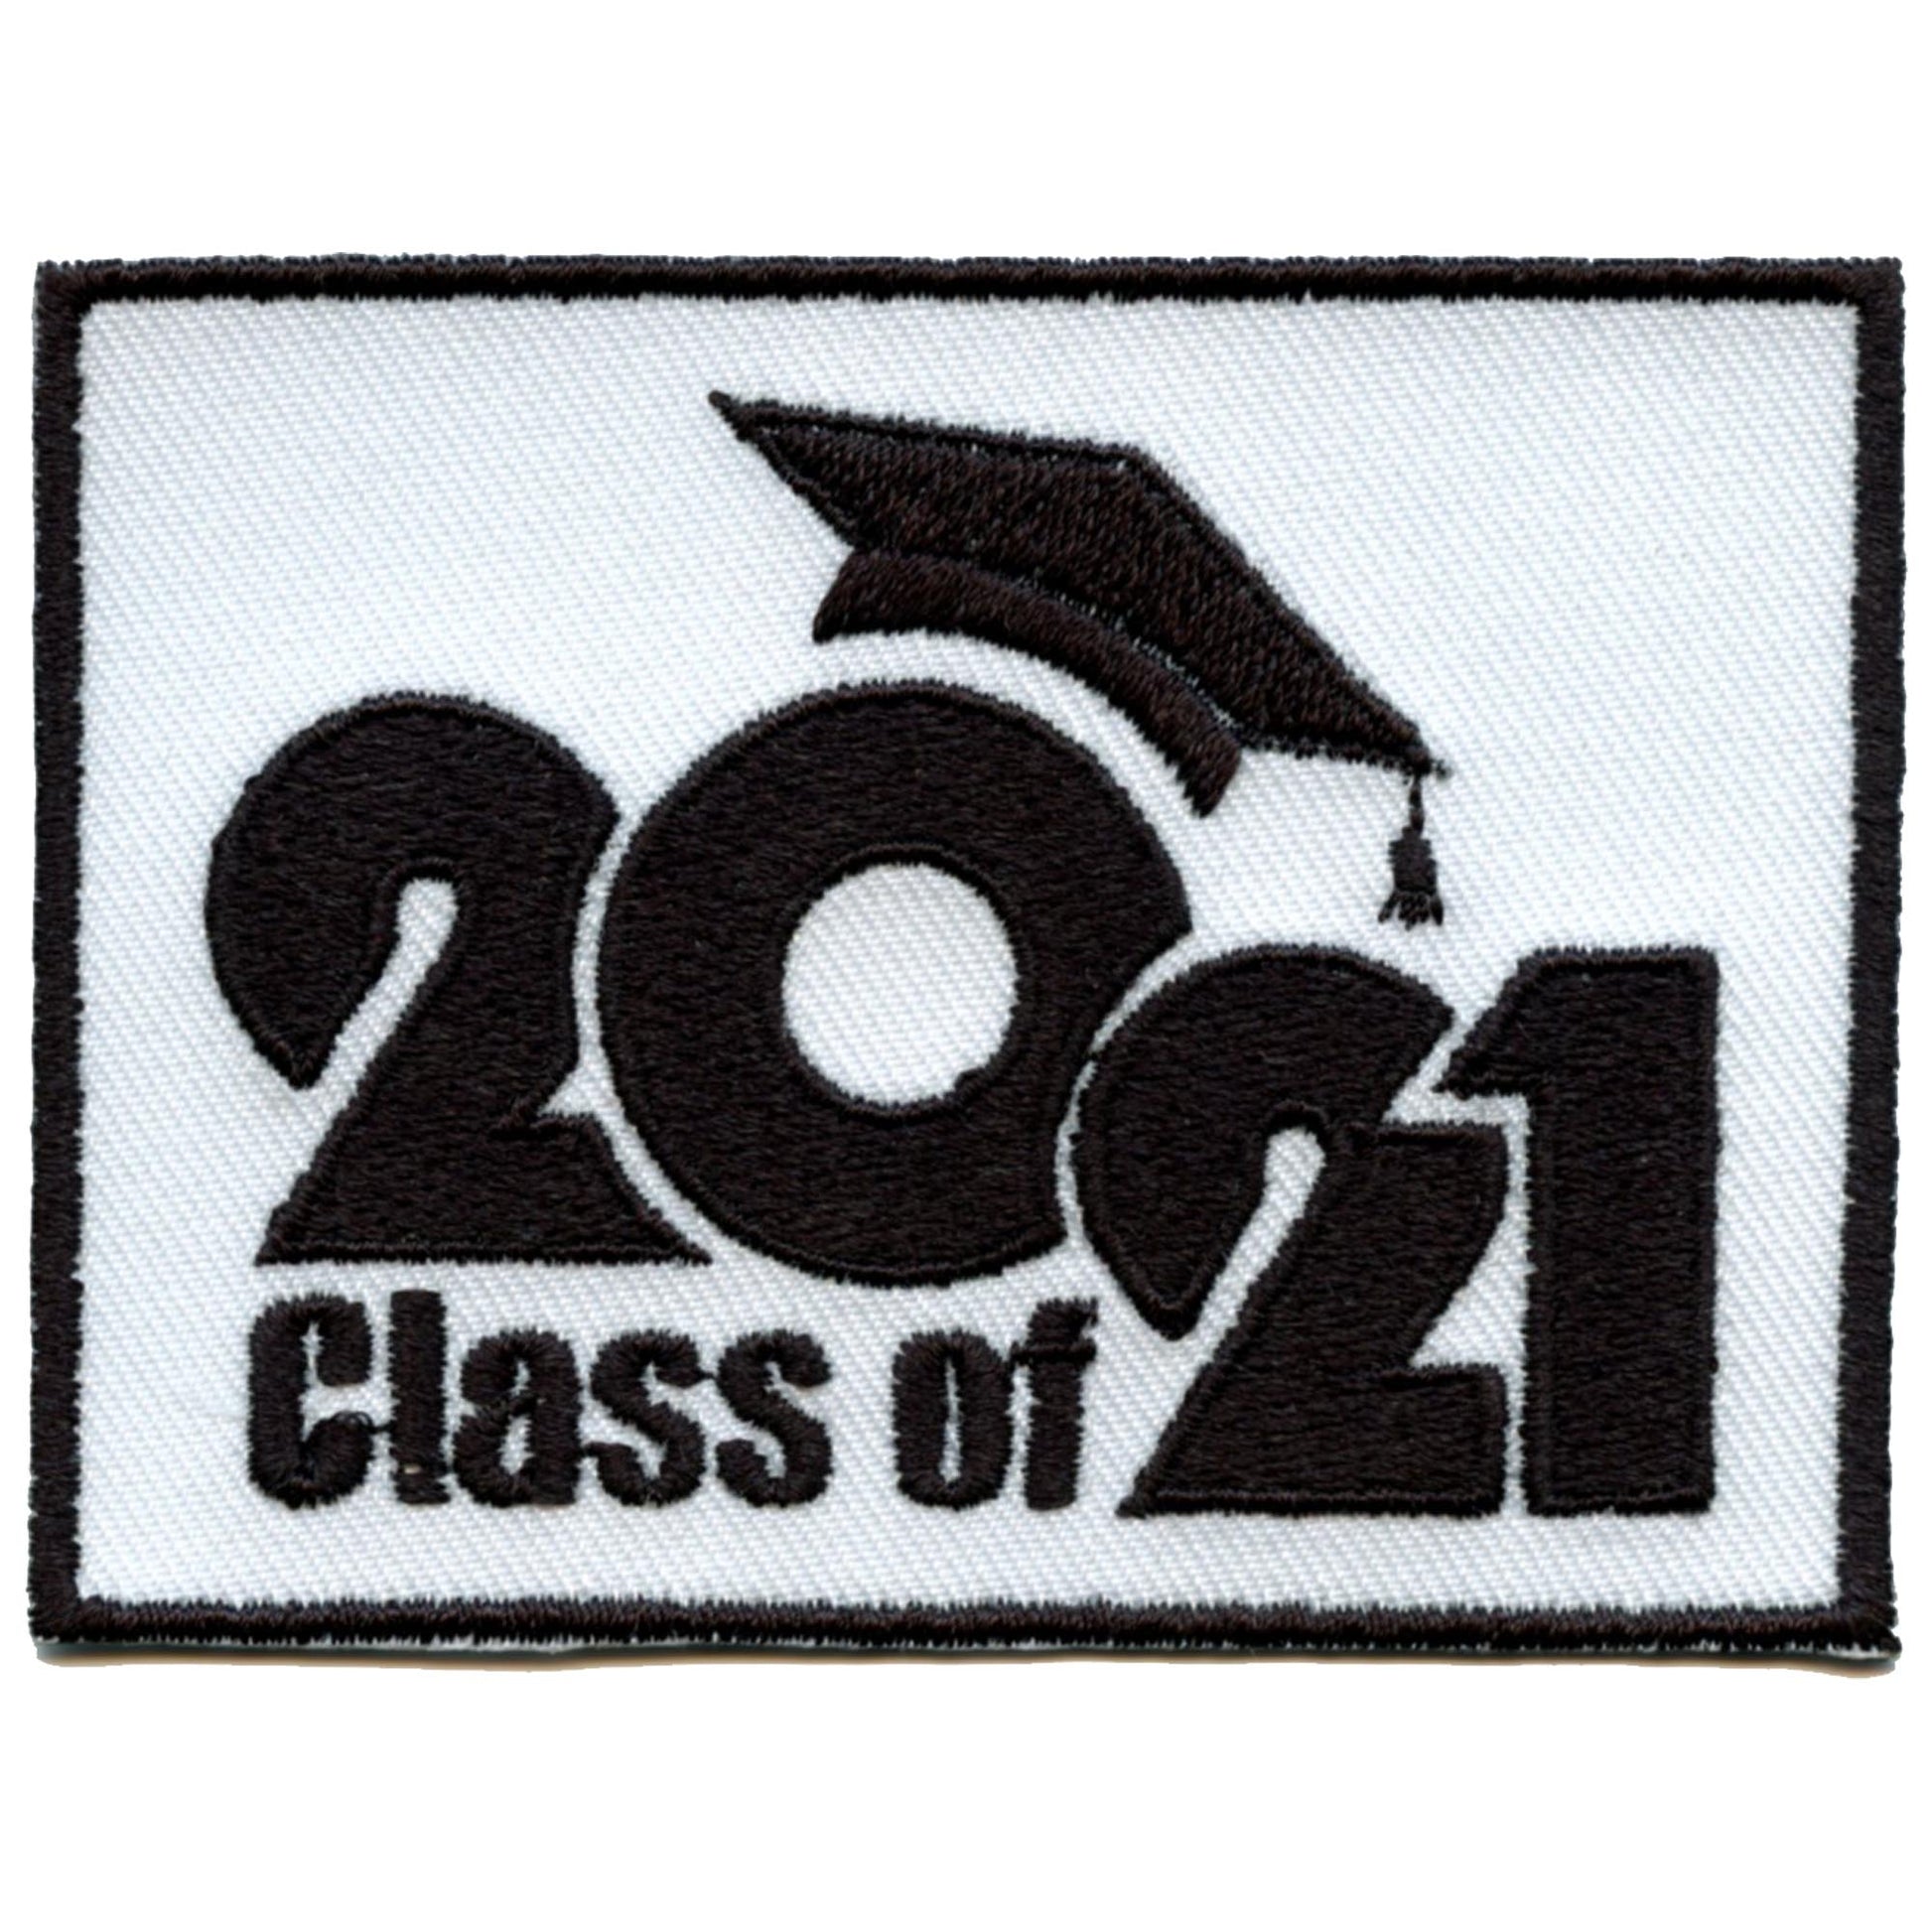 Class Of 2021 Script with Graduation Cap Embroidered Iron On Patch 